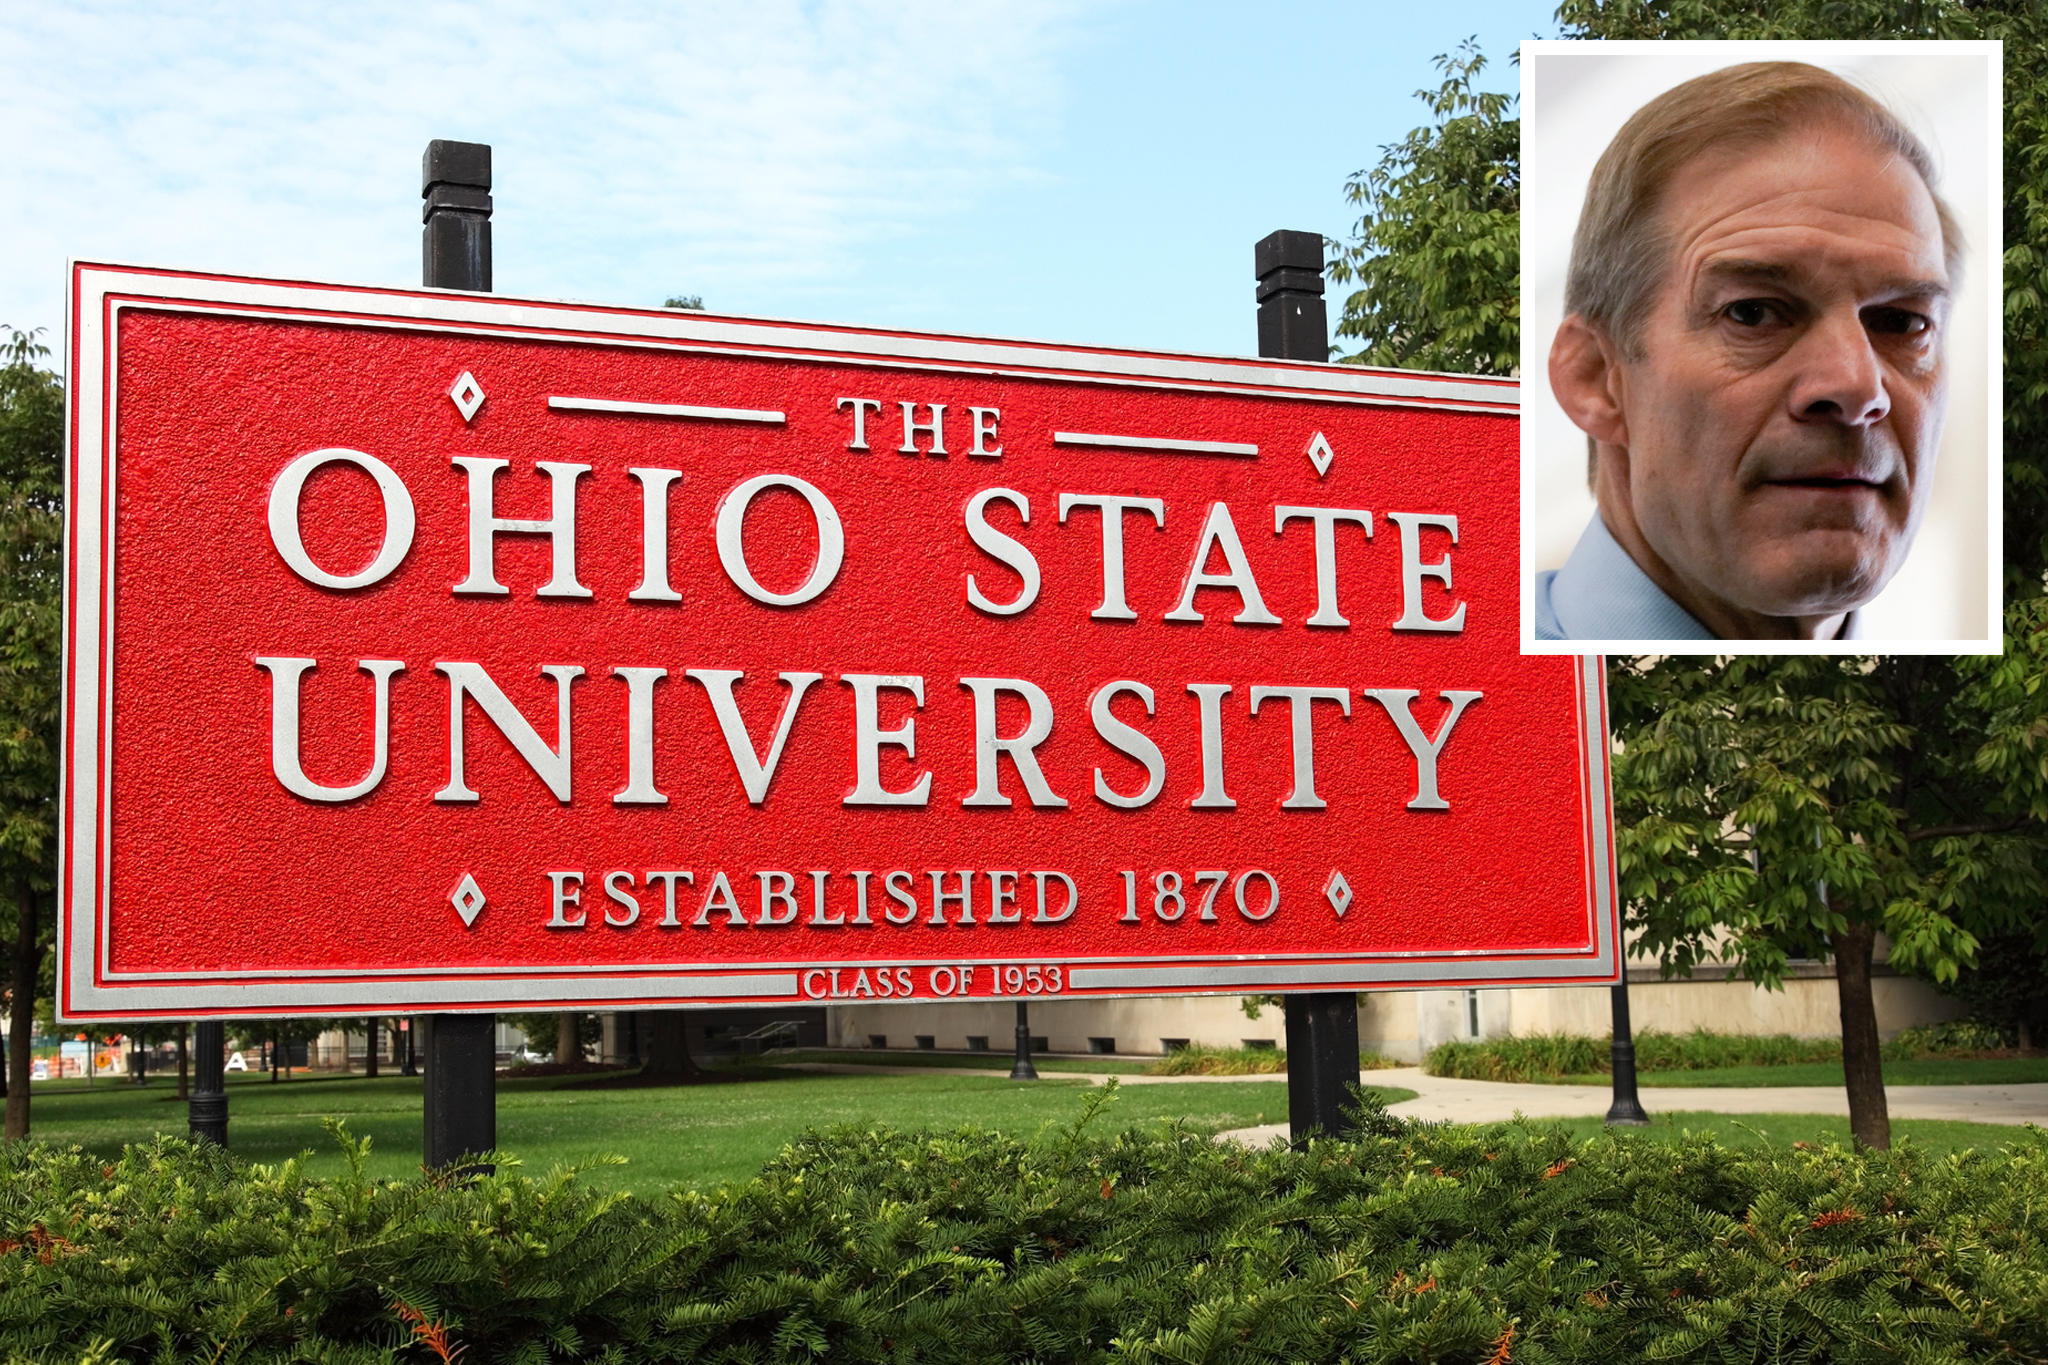 <p>A new documentary is coming out about Ohio State University</p>